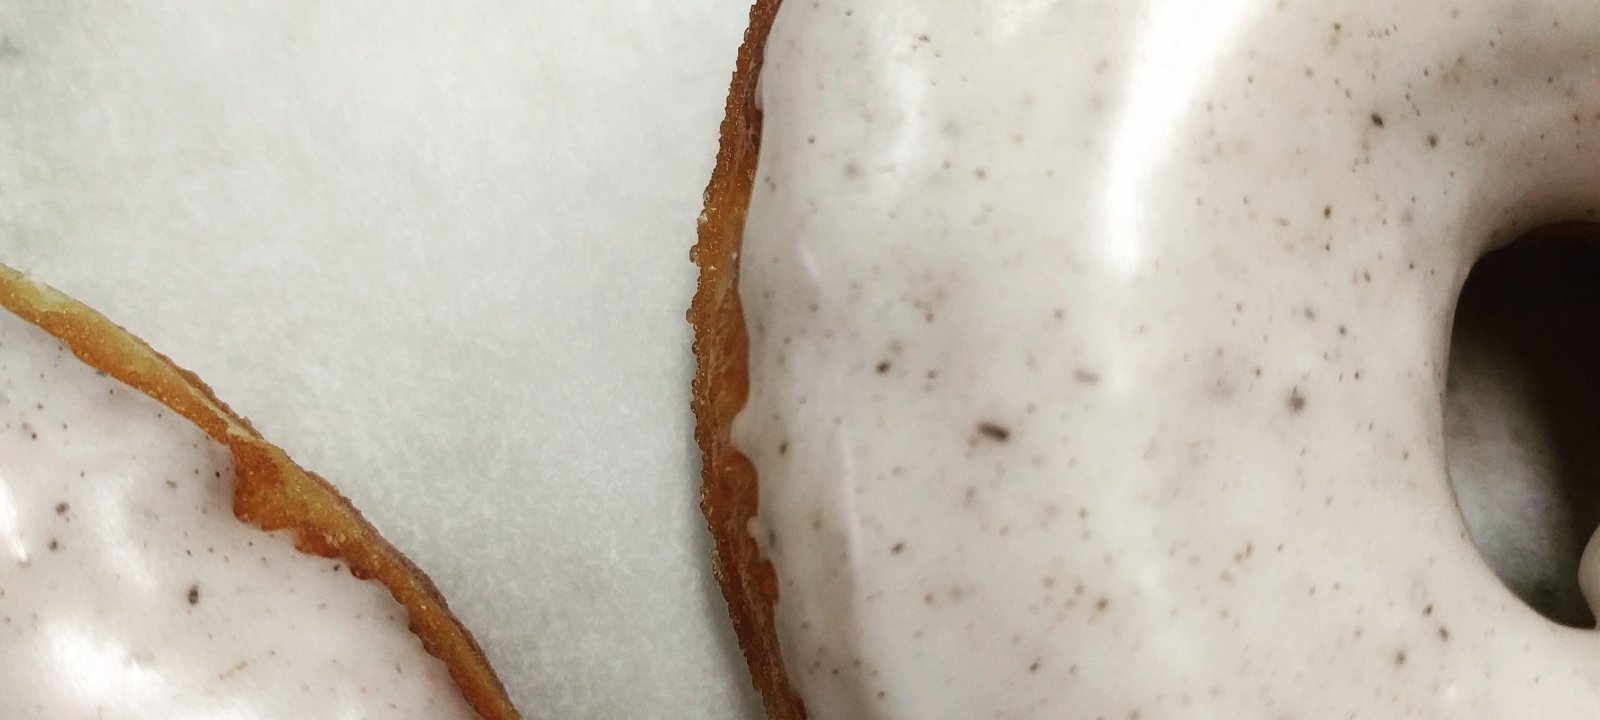 Quest for the Best: Doughnuts in Saskatoon